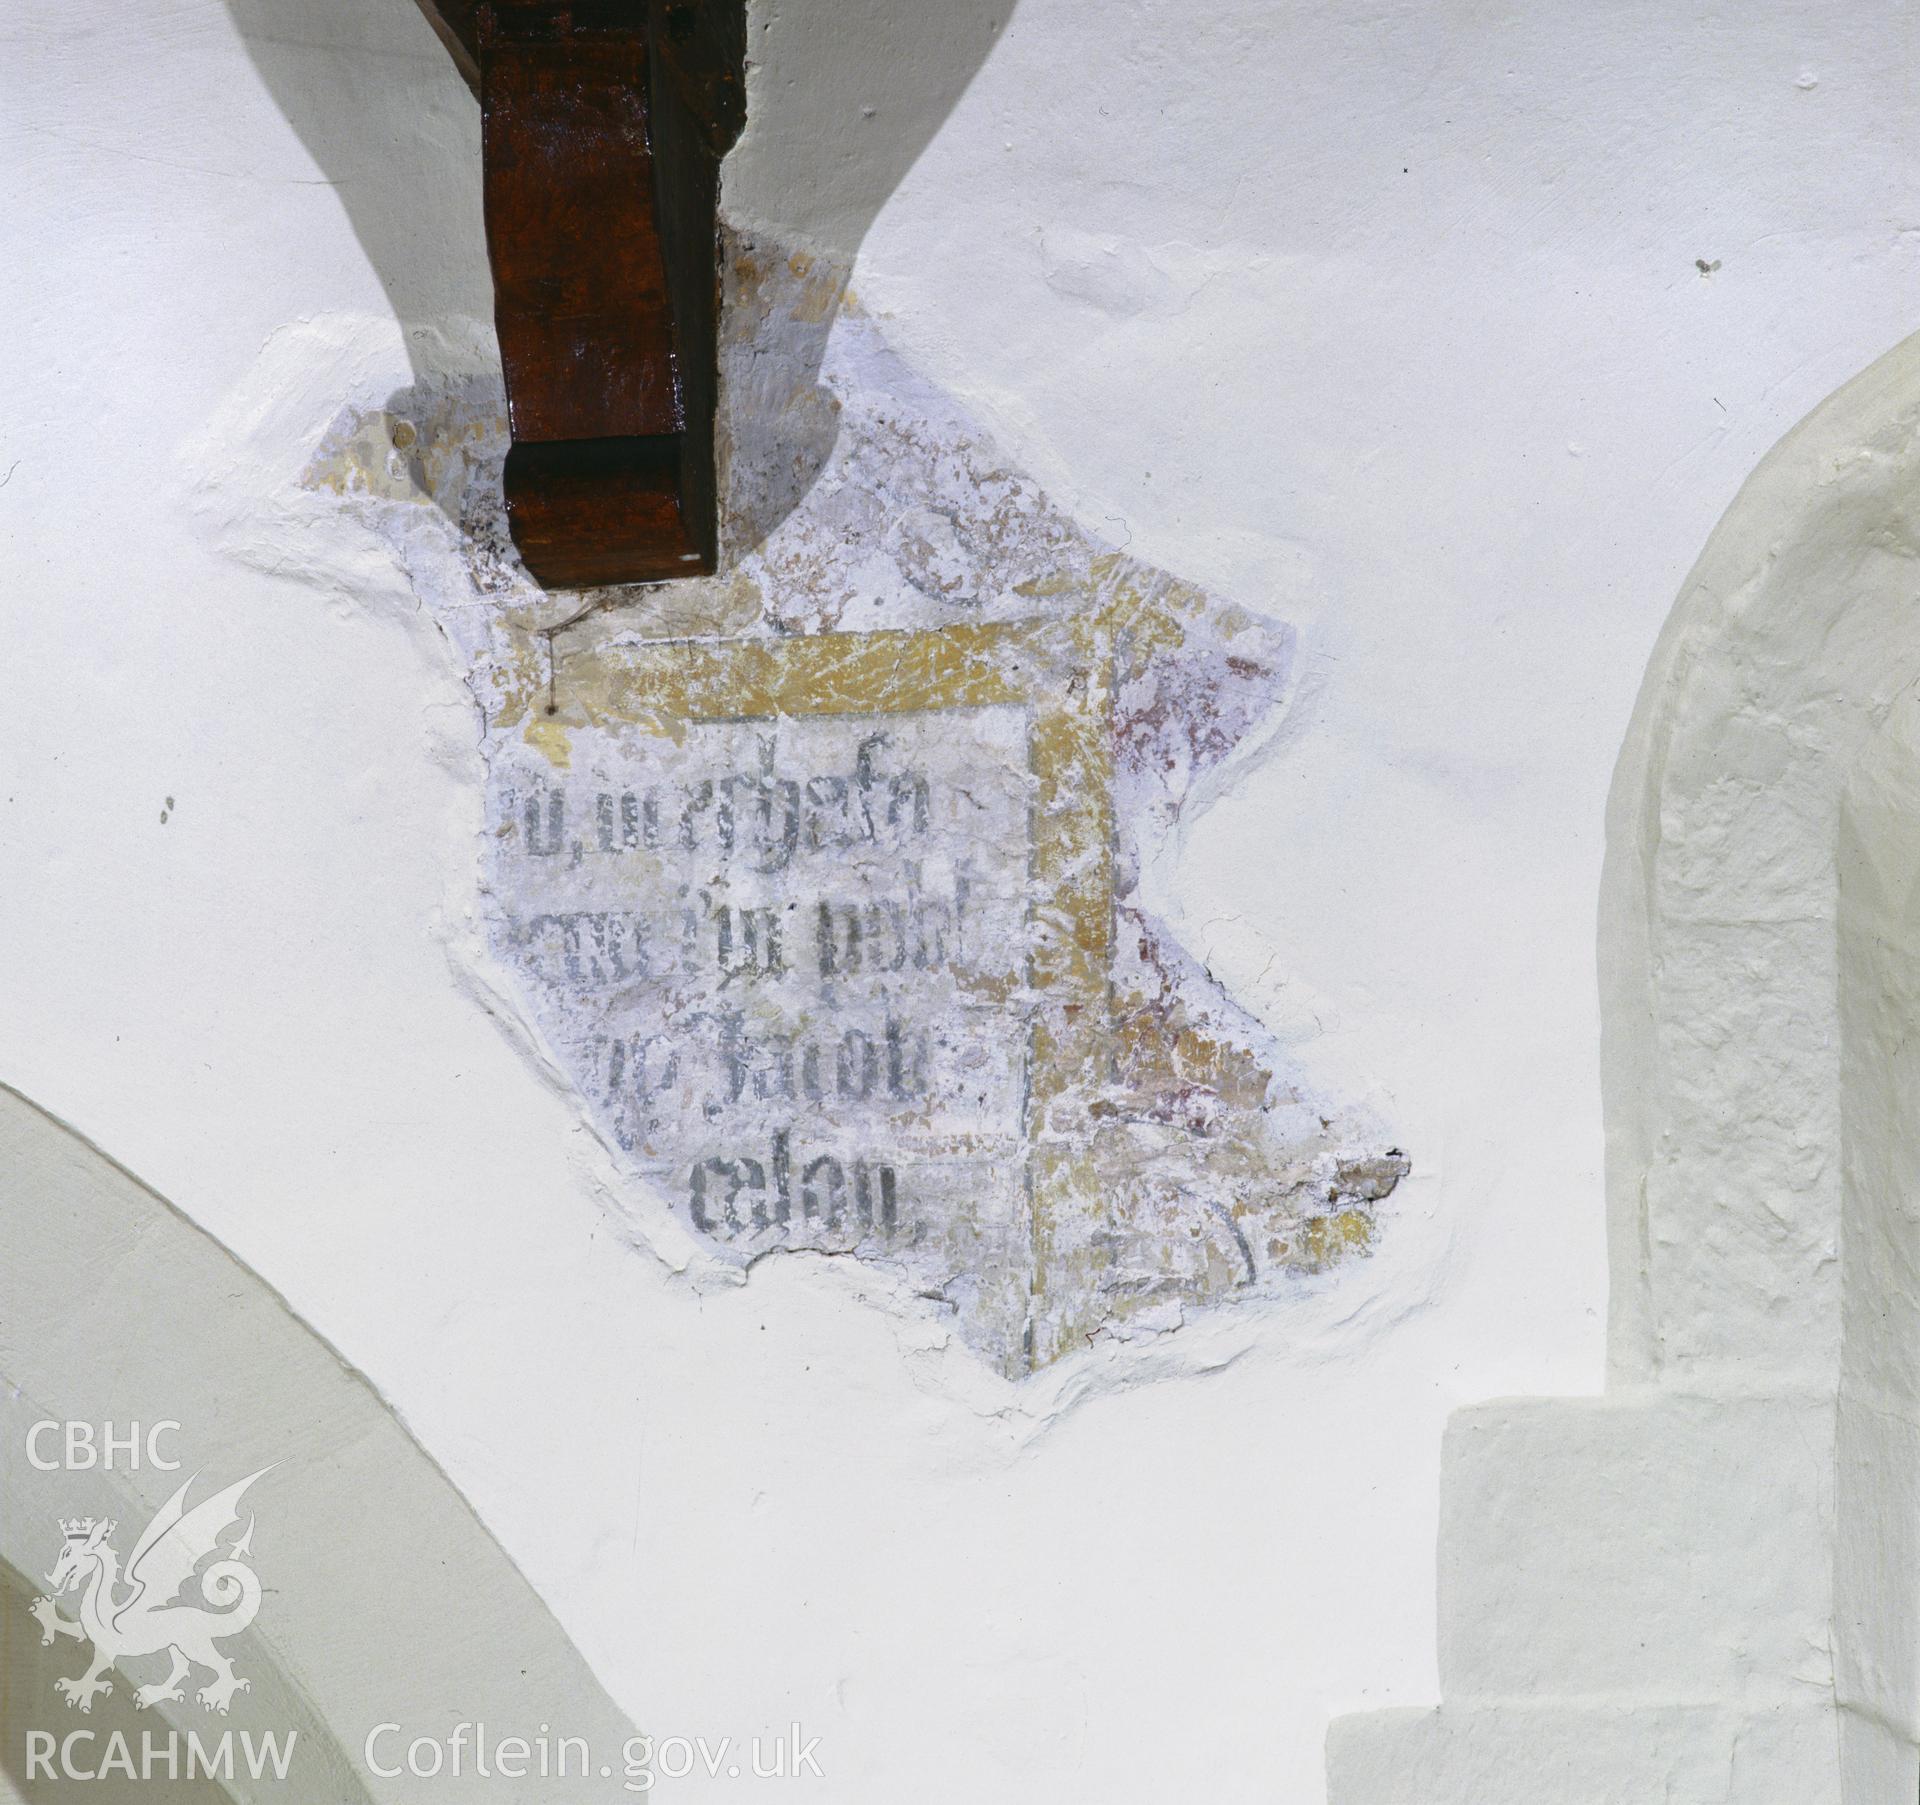 RCAHMW colour transparency of wallpainting in St Marys Church, Rhuddlan, taken by Iain Wright.